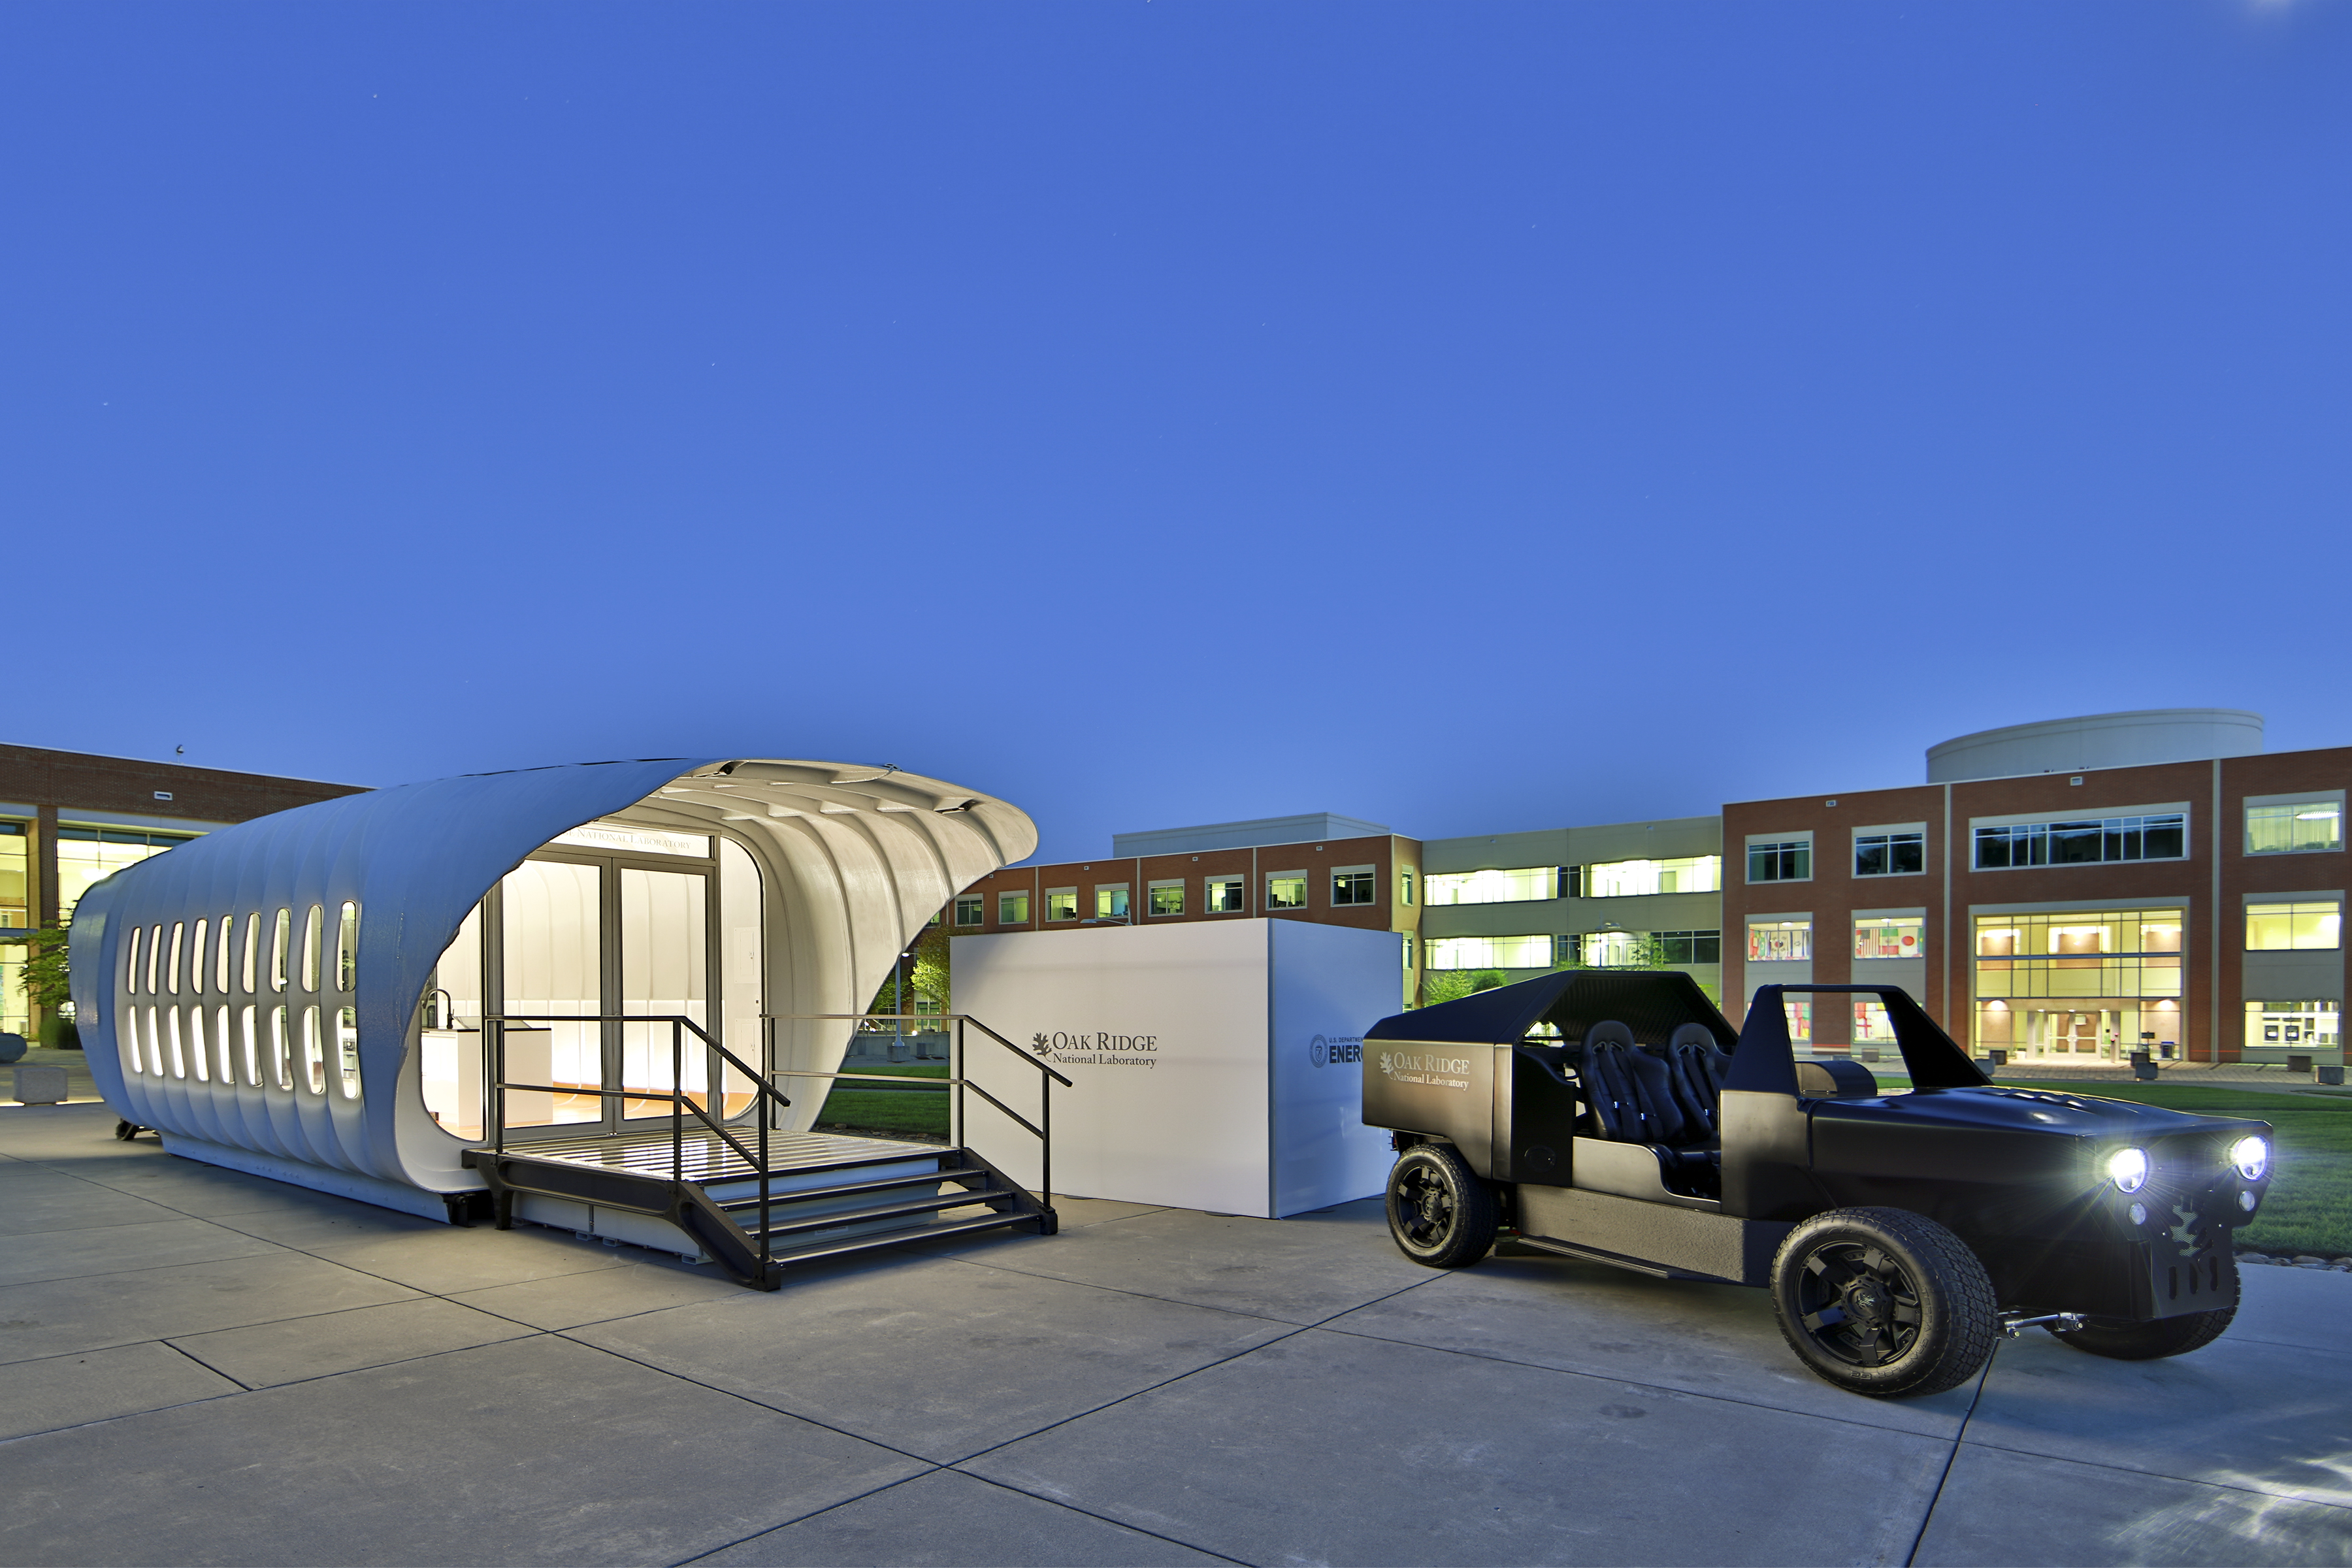 3d printed house and SUV photographed at night with lights glowing at night